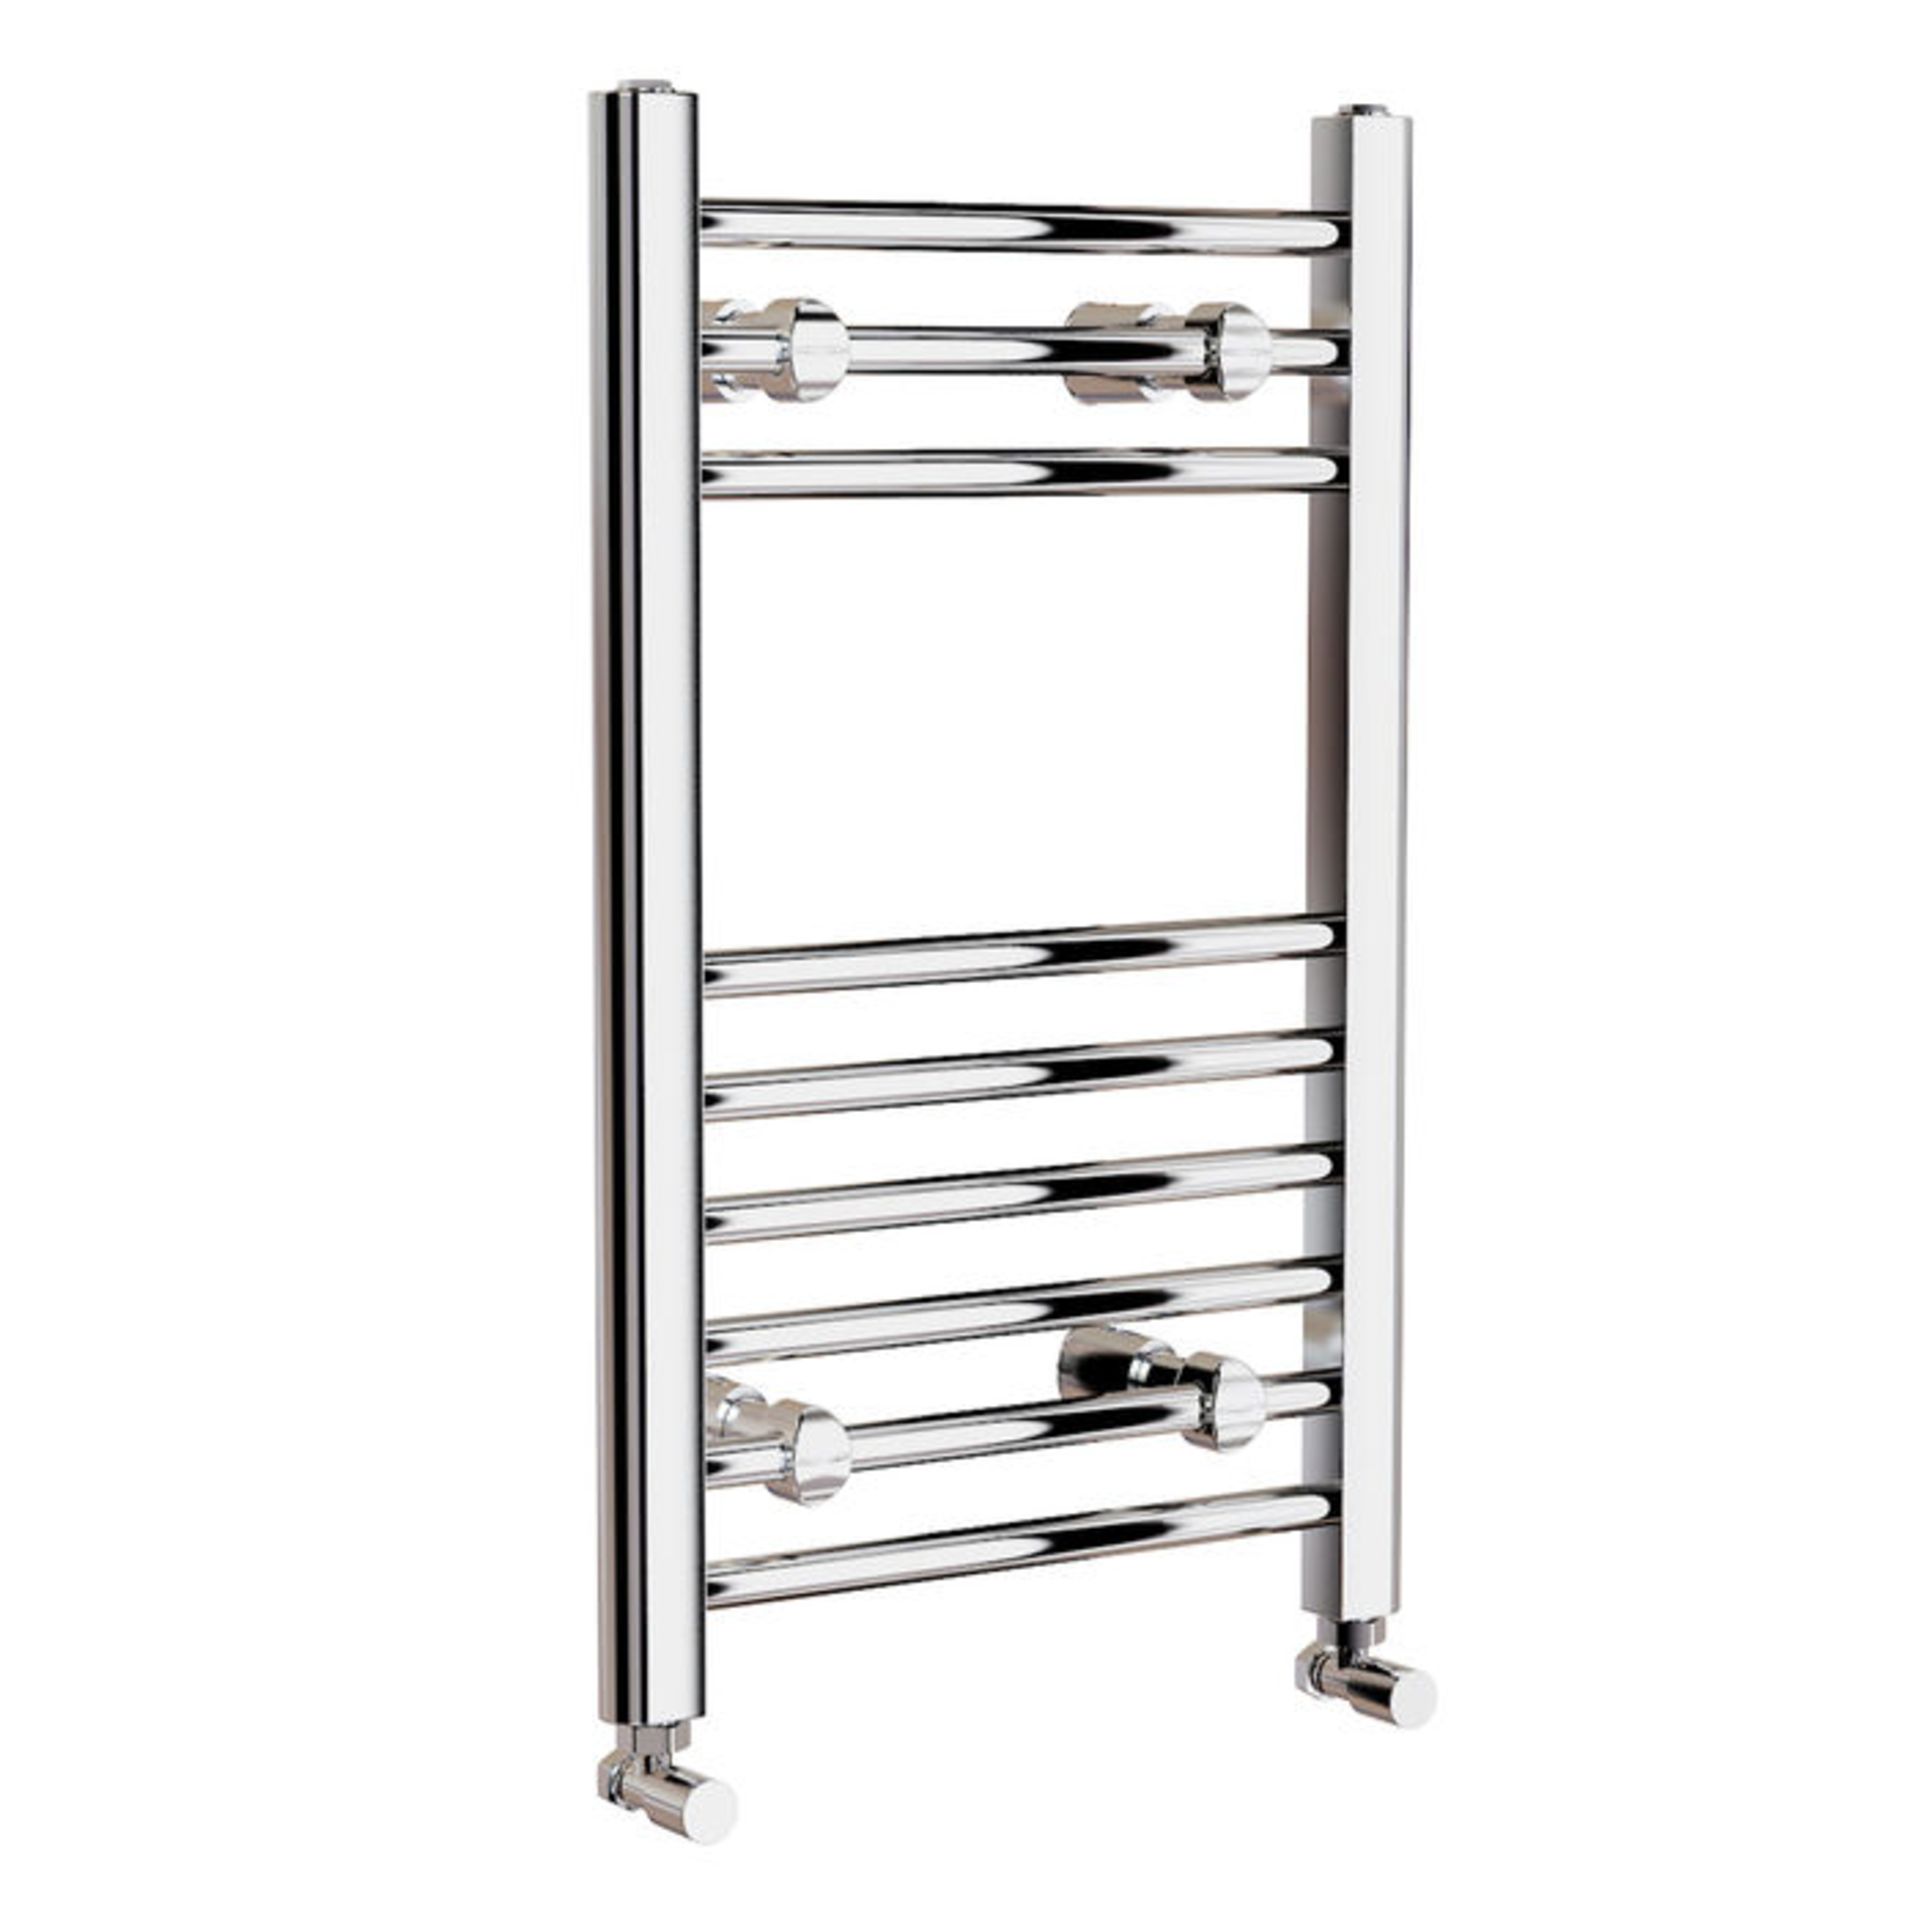 (ZL54) 650x400mm Straight Heated Towel Radiator. Low carbon steel chrome plated radiator. This